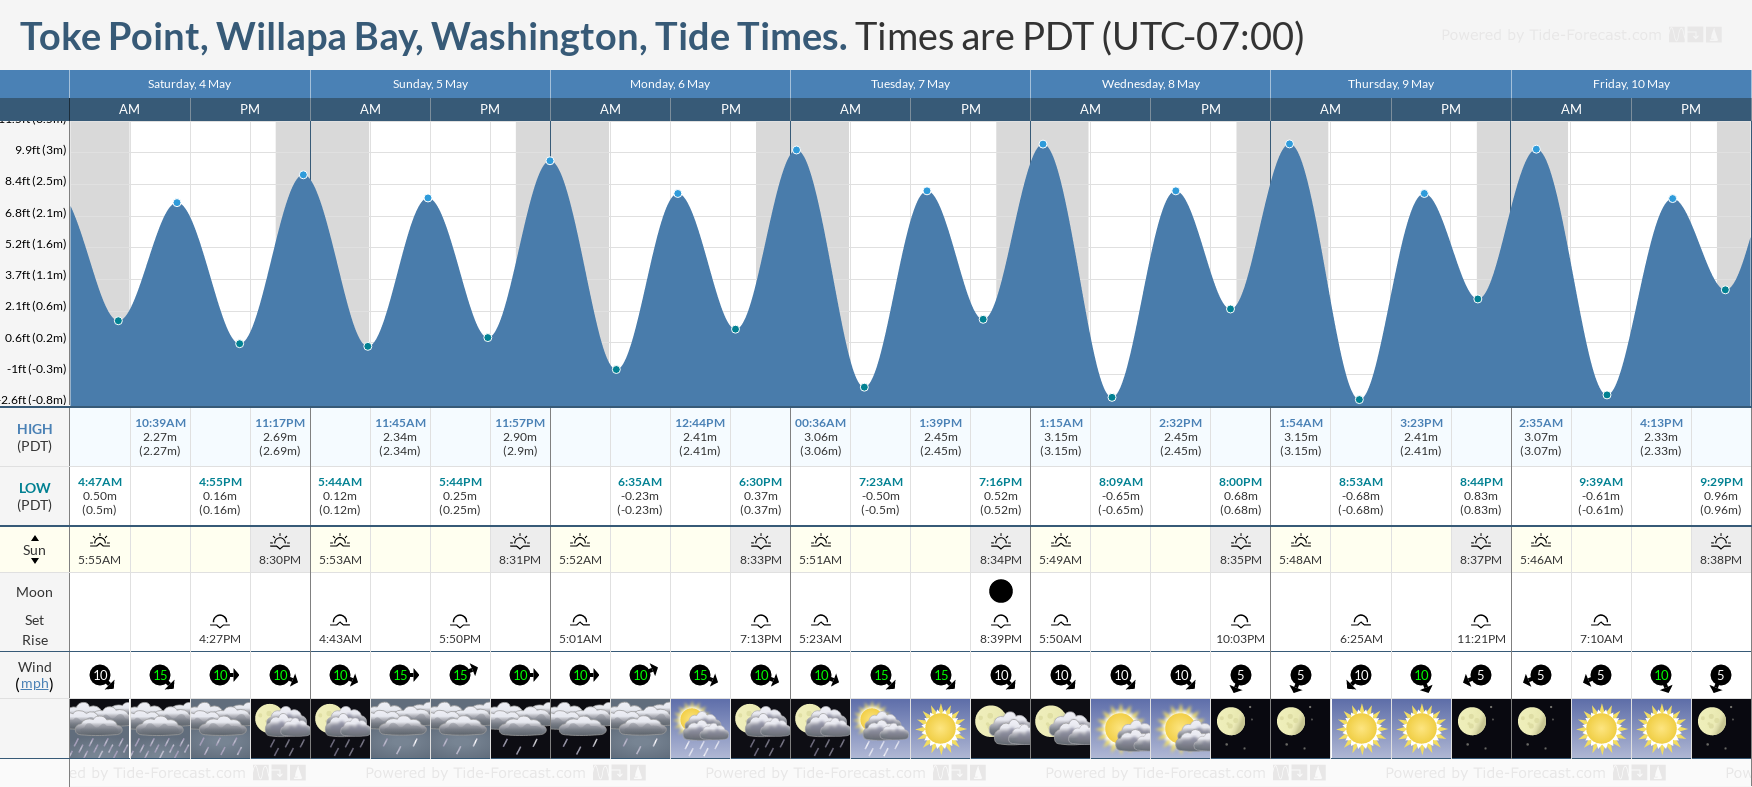 Toke Point, Willapa Bay, Washington Tide Chart including high and low tide tide times for the next 7 days